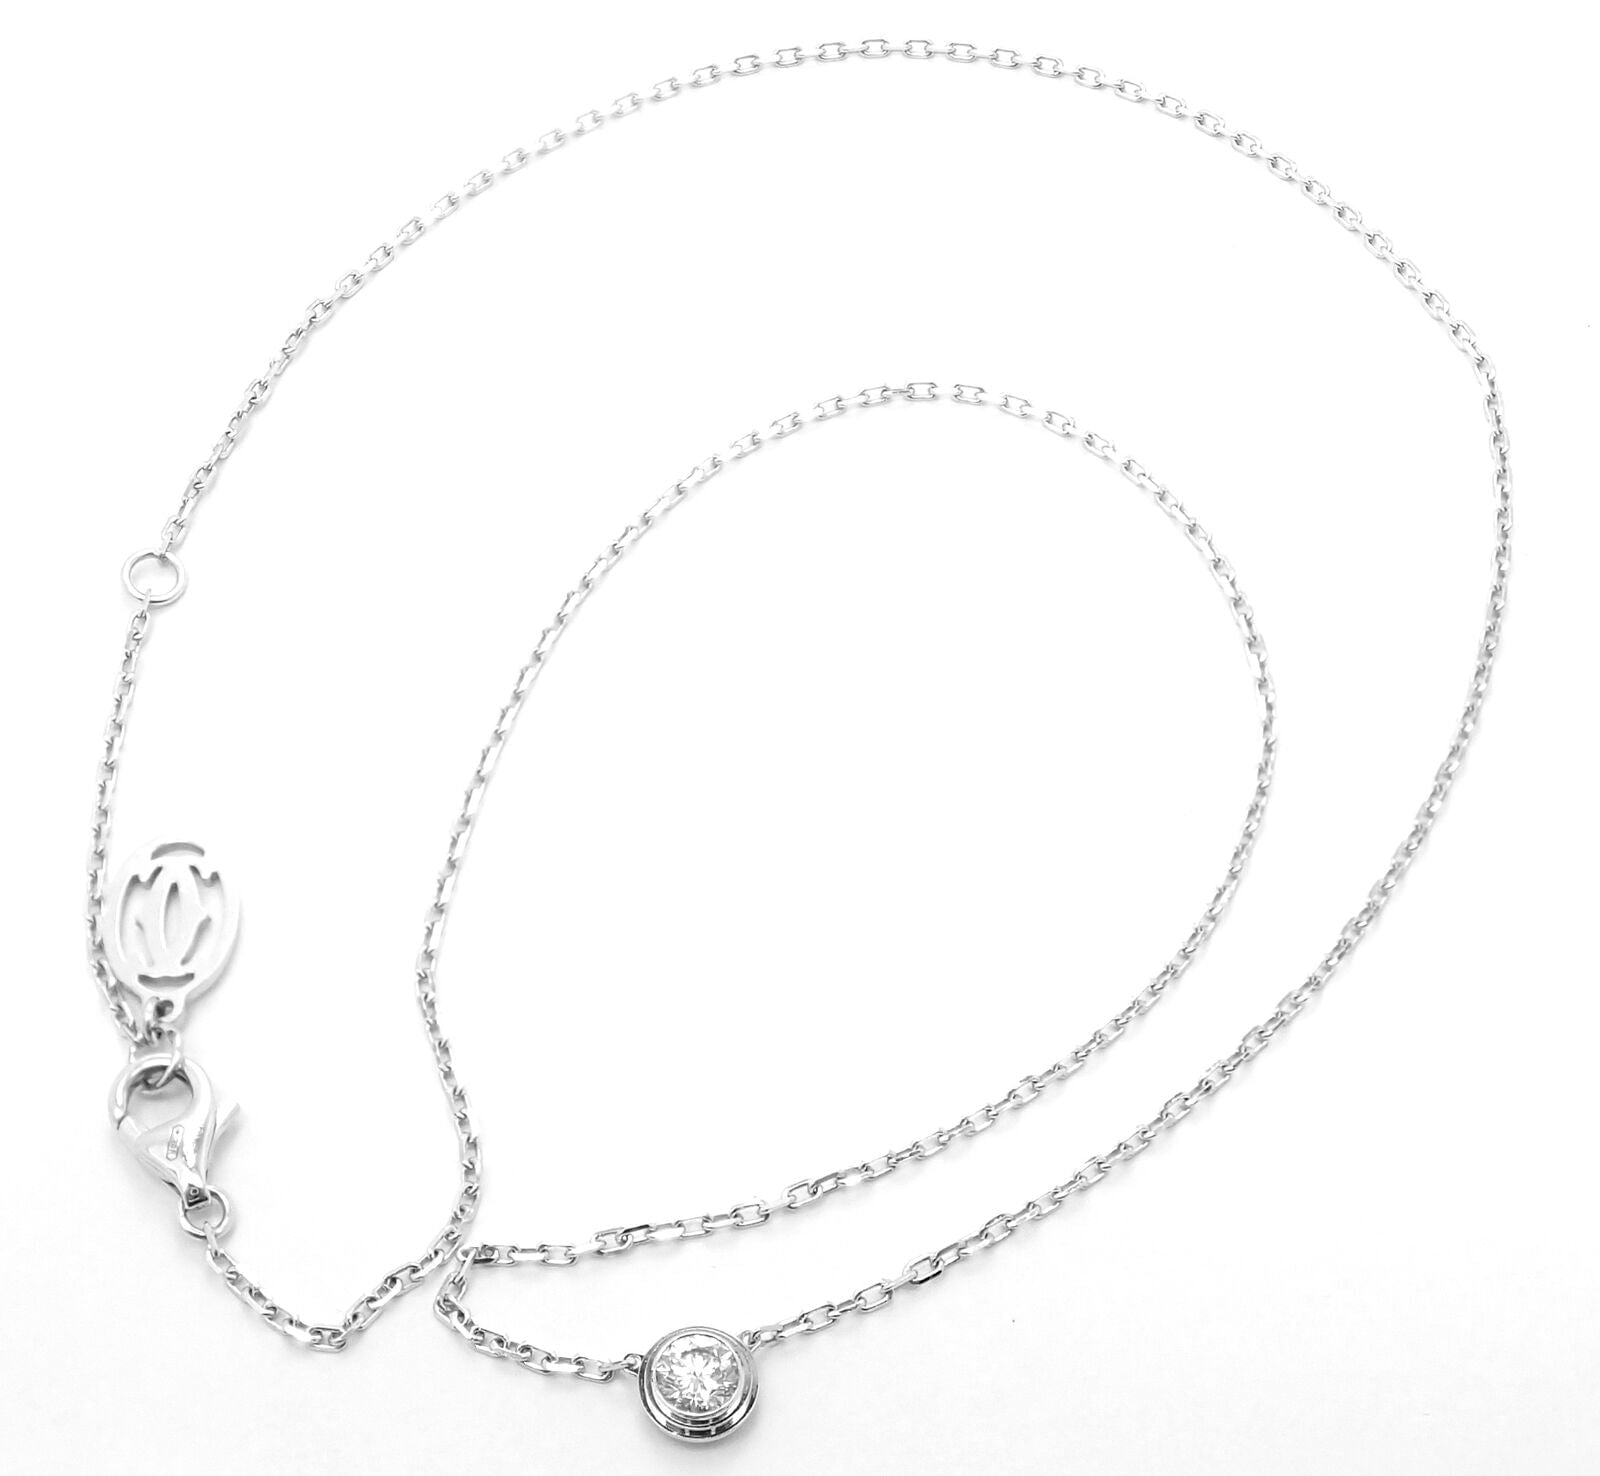 Cartier - Cartier d'Amour necklace White gold, diamonds http://www.cartier .us/collections/jewelry/categories/necklaces/classic-diamonds-necklaces /n7406800-cartier-damour-necklace | Facebook